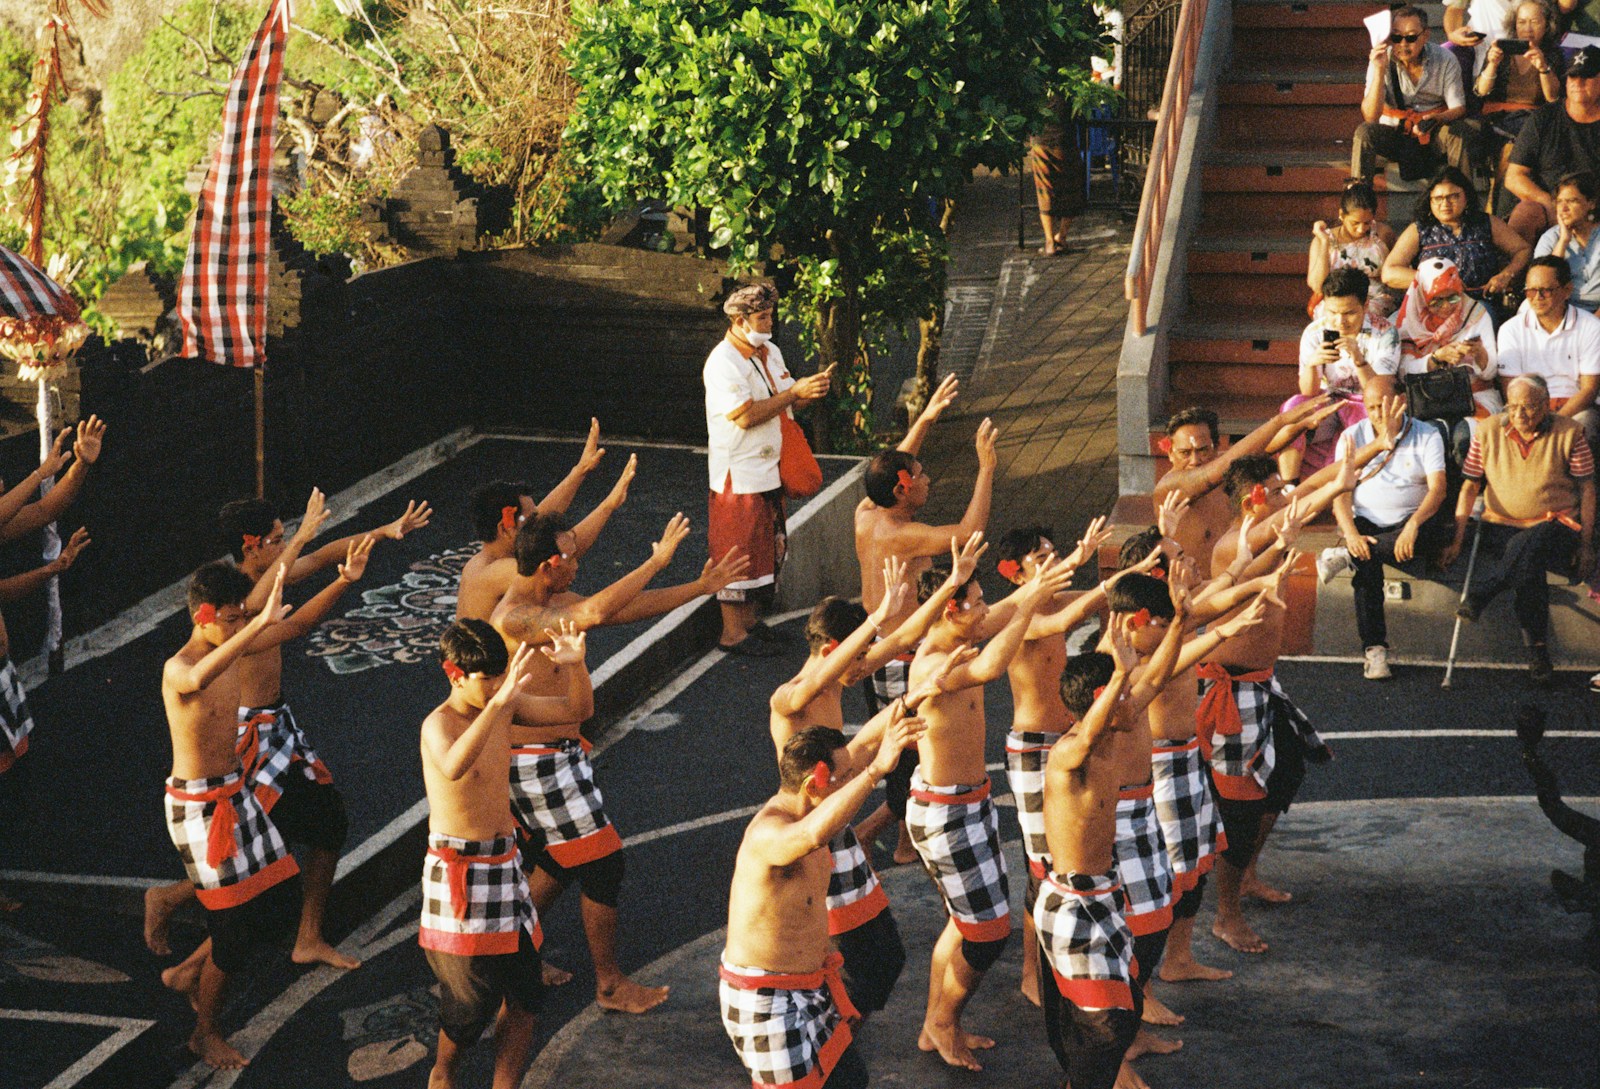 a group of men dancing in front of a crowd